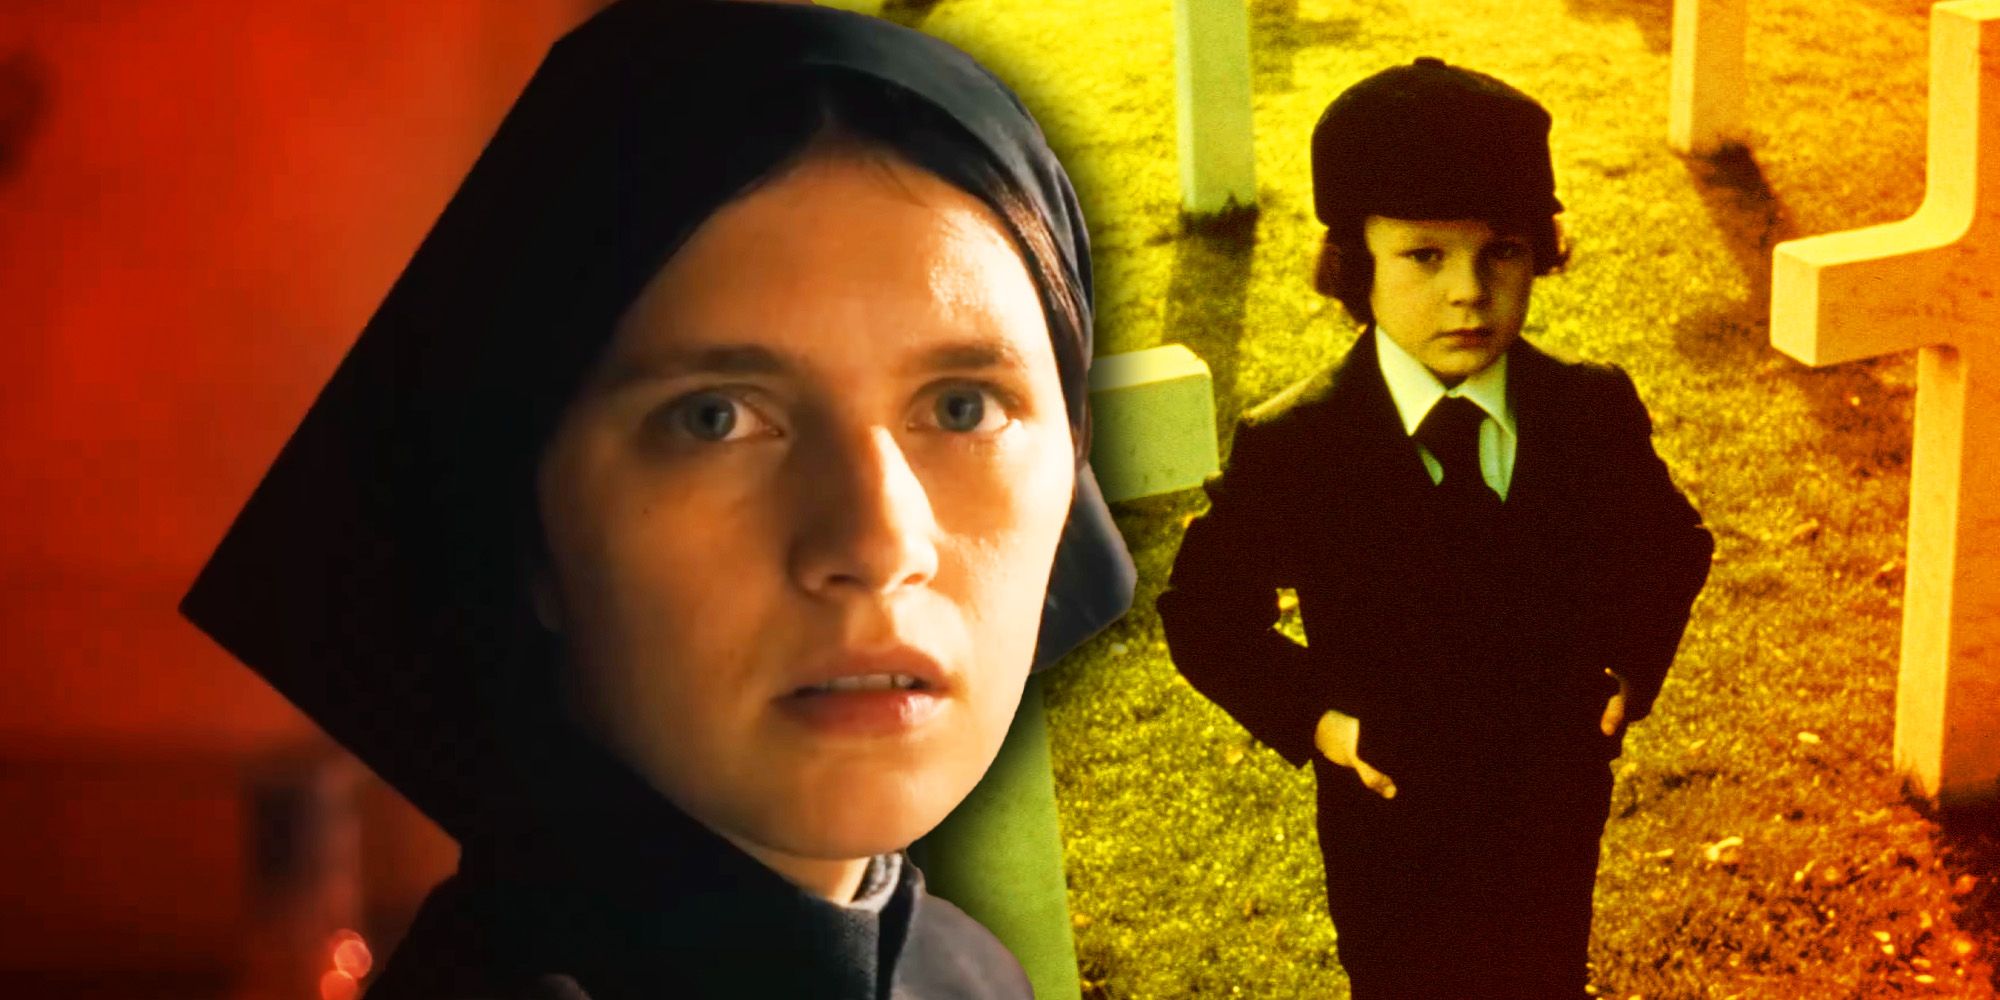 Nell Tiger Free as Margaret in The First Omen, and Harvey Spencer Stephens as Damien Thorn in The Omen.